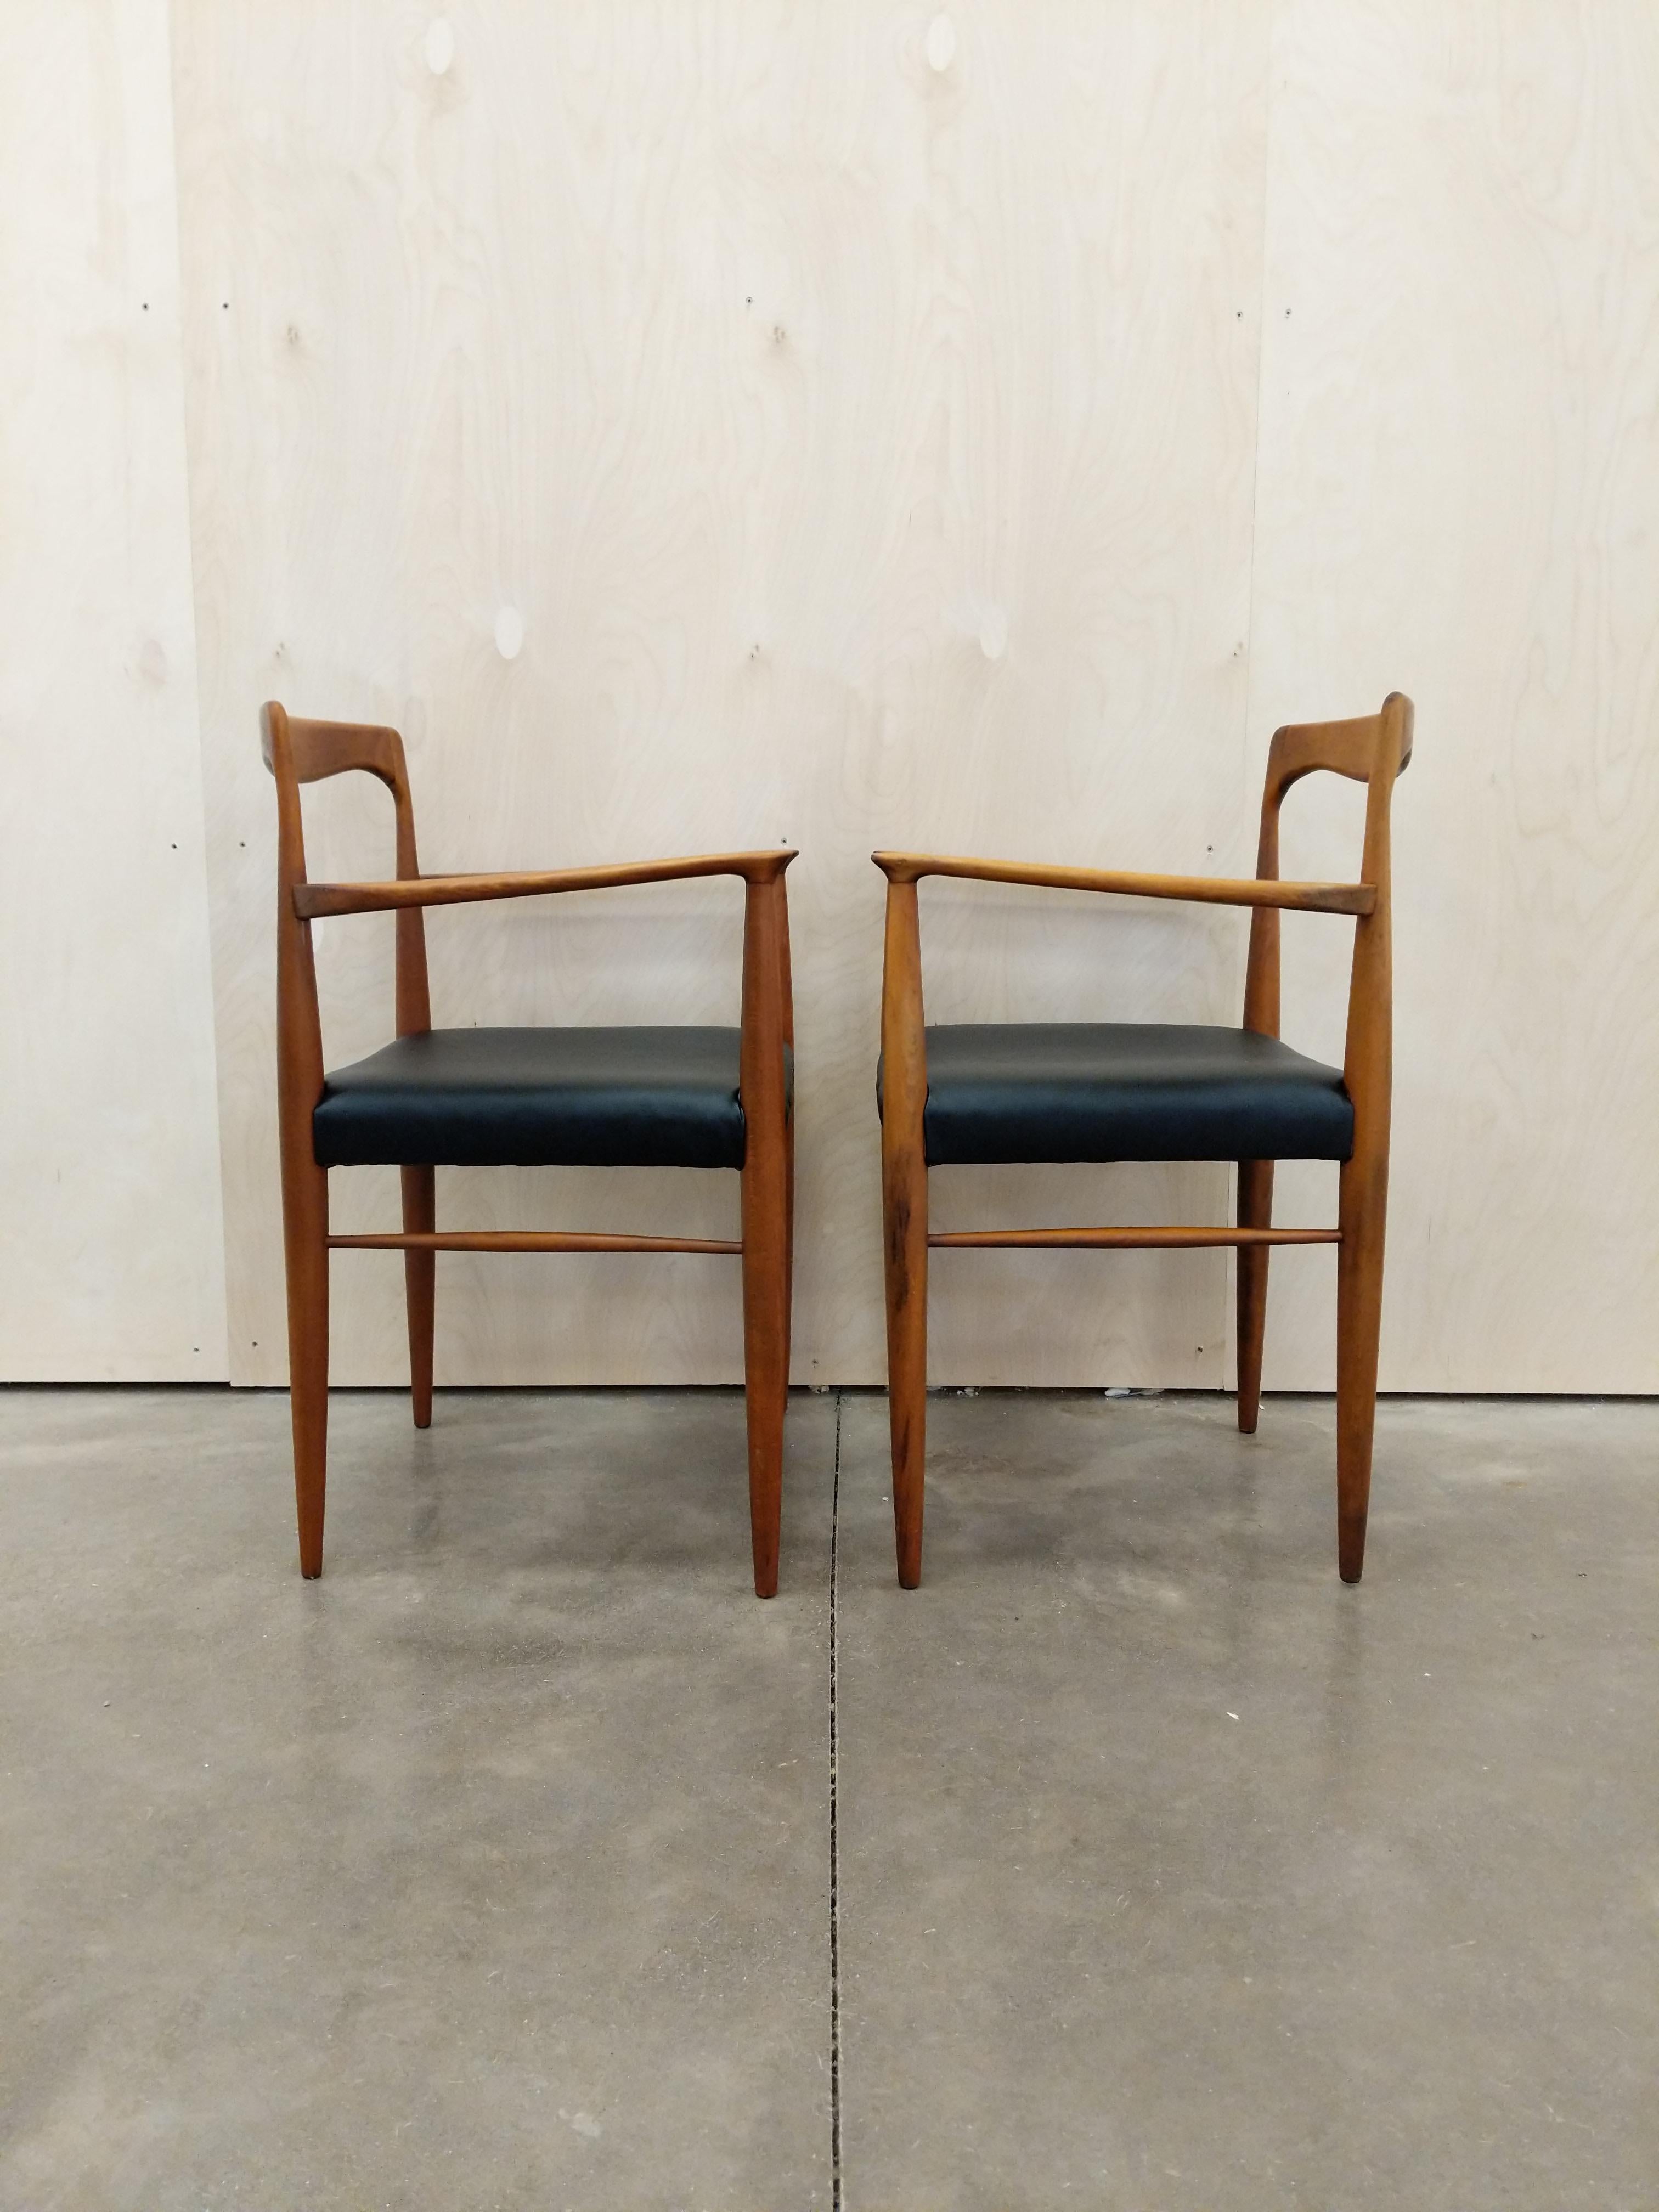 Pair of authentic vintage Czech mid century modern armchairs.

Designed by Karel Vycital for Drevotvar.

This set is in very good vintage condition with new upholstery and few signs of age-related wear (see photos).

If you would like any additional